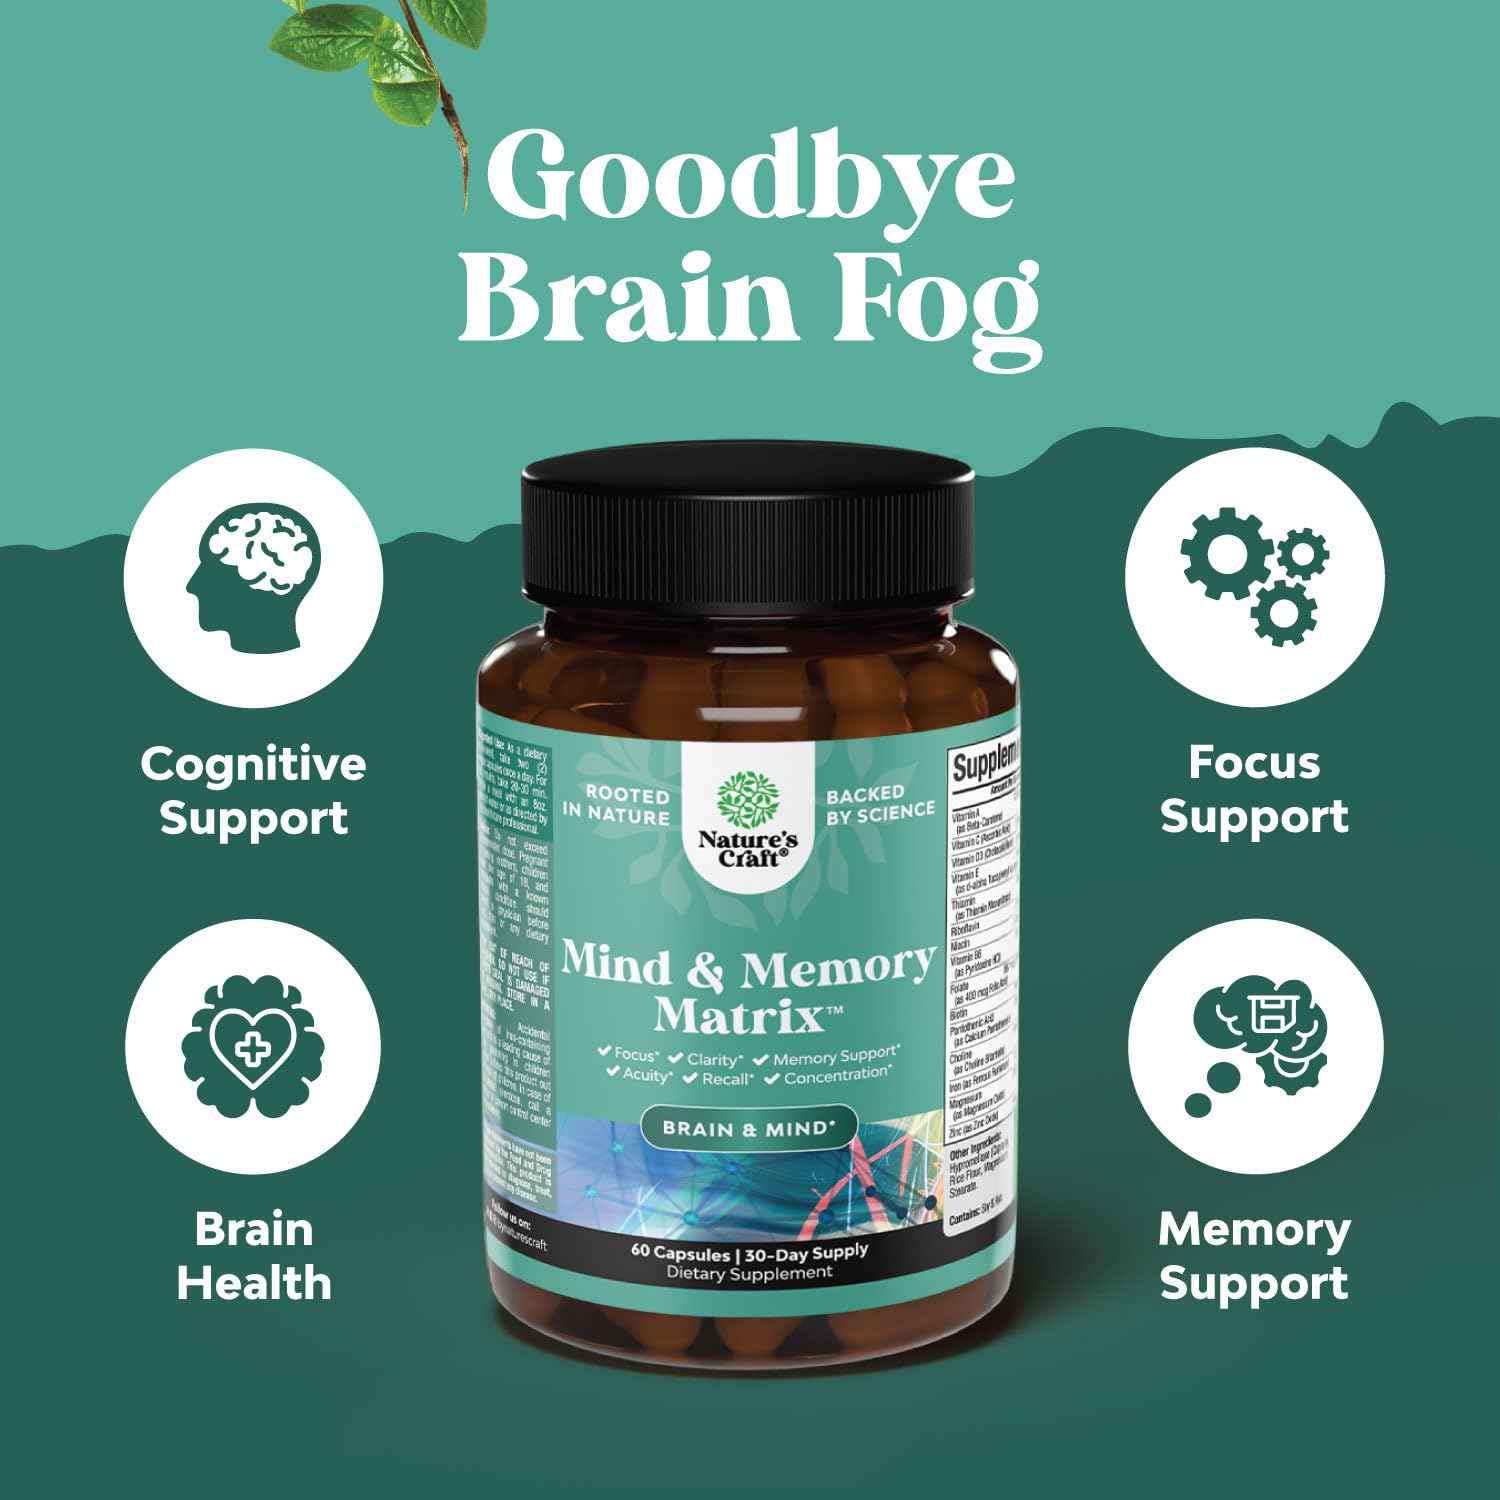 Bundle of Nootropic Memory Supplement for Brain Support and Advanced Brain Supplement for Memory and Focus - for Brain Boost and Natural Energy Booster - for Brain Fog Clarity Energy and Recall